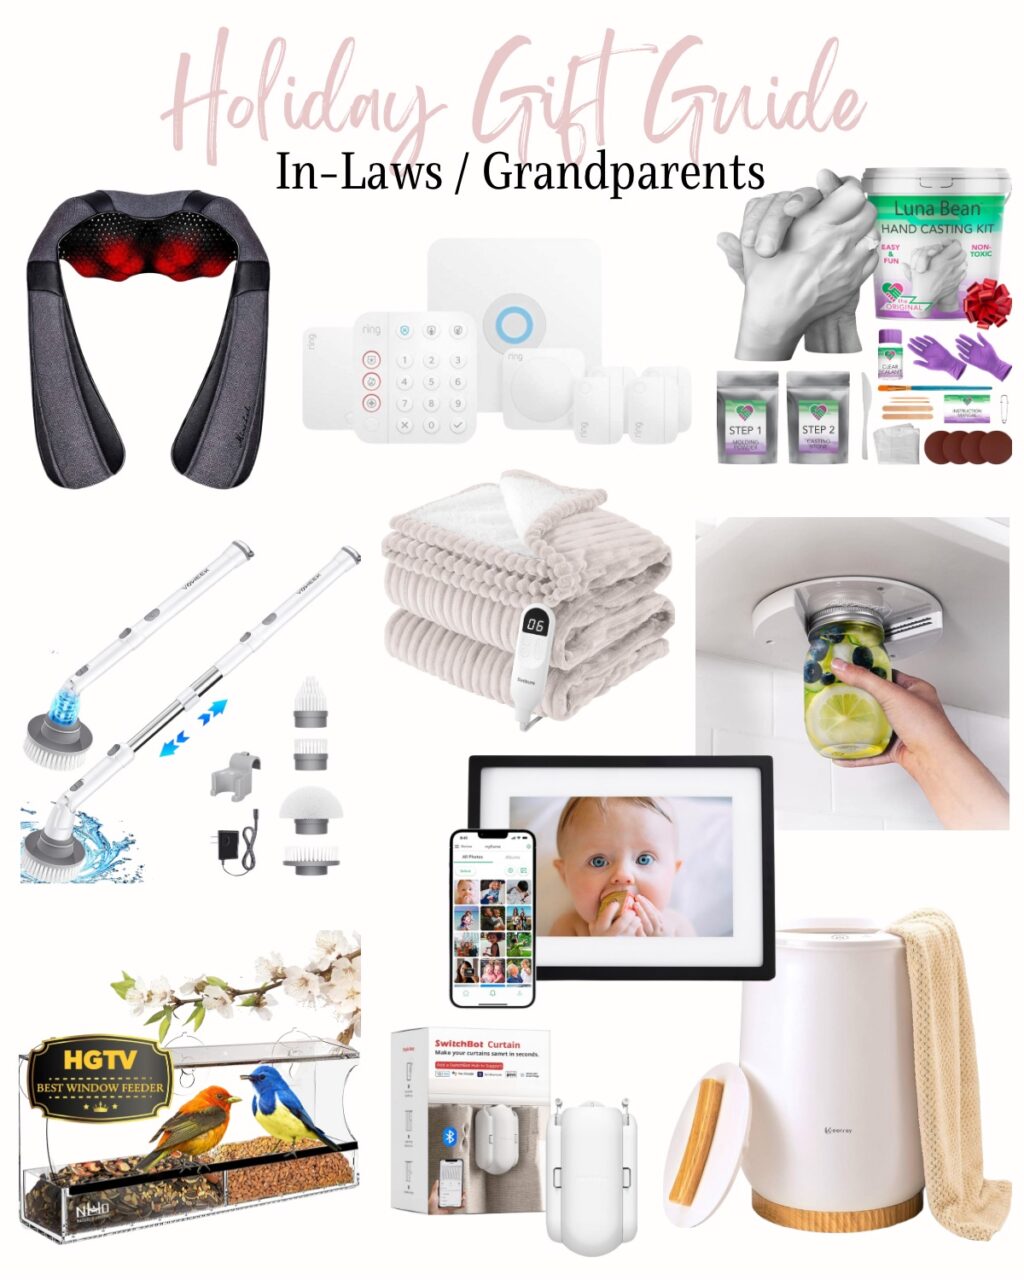 holiday gifts for in-laws or grandparents, useful and practical gifts